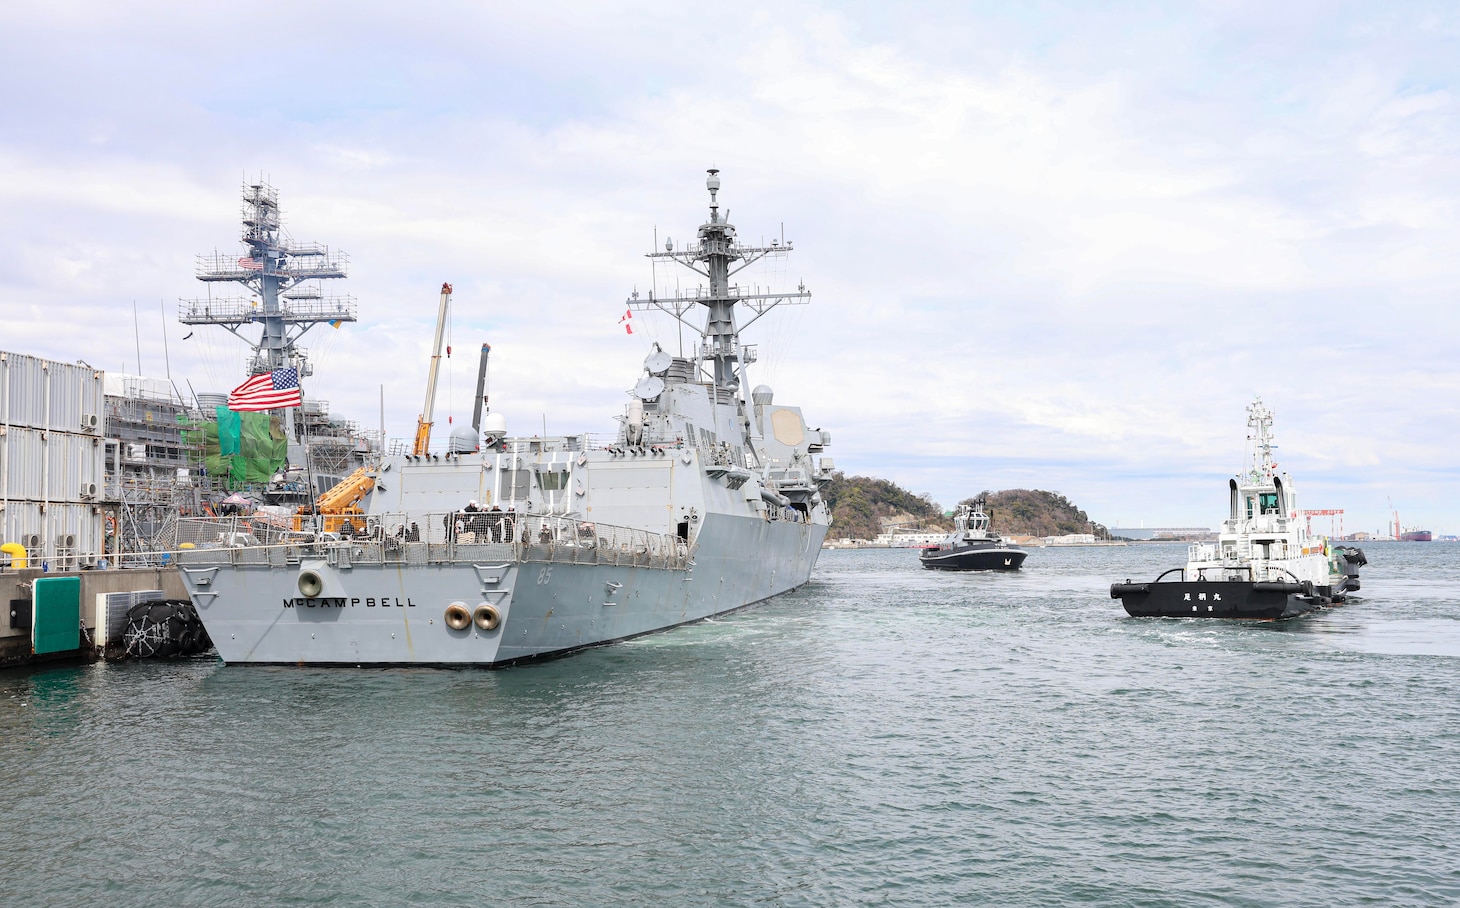 YOKOSUKA, Japan (March 2, 2024) – The Arleigh Burke-class guided-missile destroyer USS McCampbell (DDG 85) sits pierside after returning to Commander, Fleet Activities Yokosuka, March 2, after a 17-month Depot Modernization Period in Portland, Oregon. McCampbell is forward-deployed and assigned to Destroyer Squadron (DESRON) 15, the Navy’s largest DESRON and the U.S. 7th Fleet’s principal surface force. (U.S. Navy photo by Mass Communication Specialist 1st Class Greg Johnson)